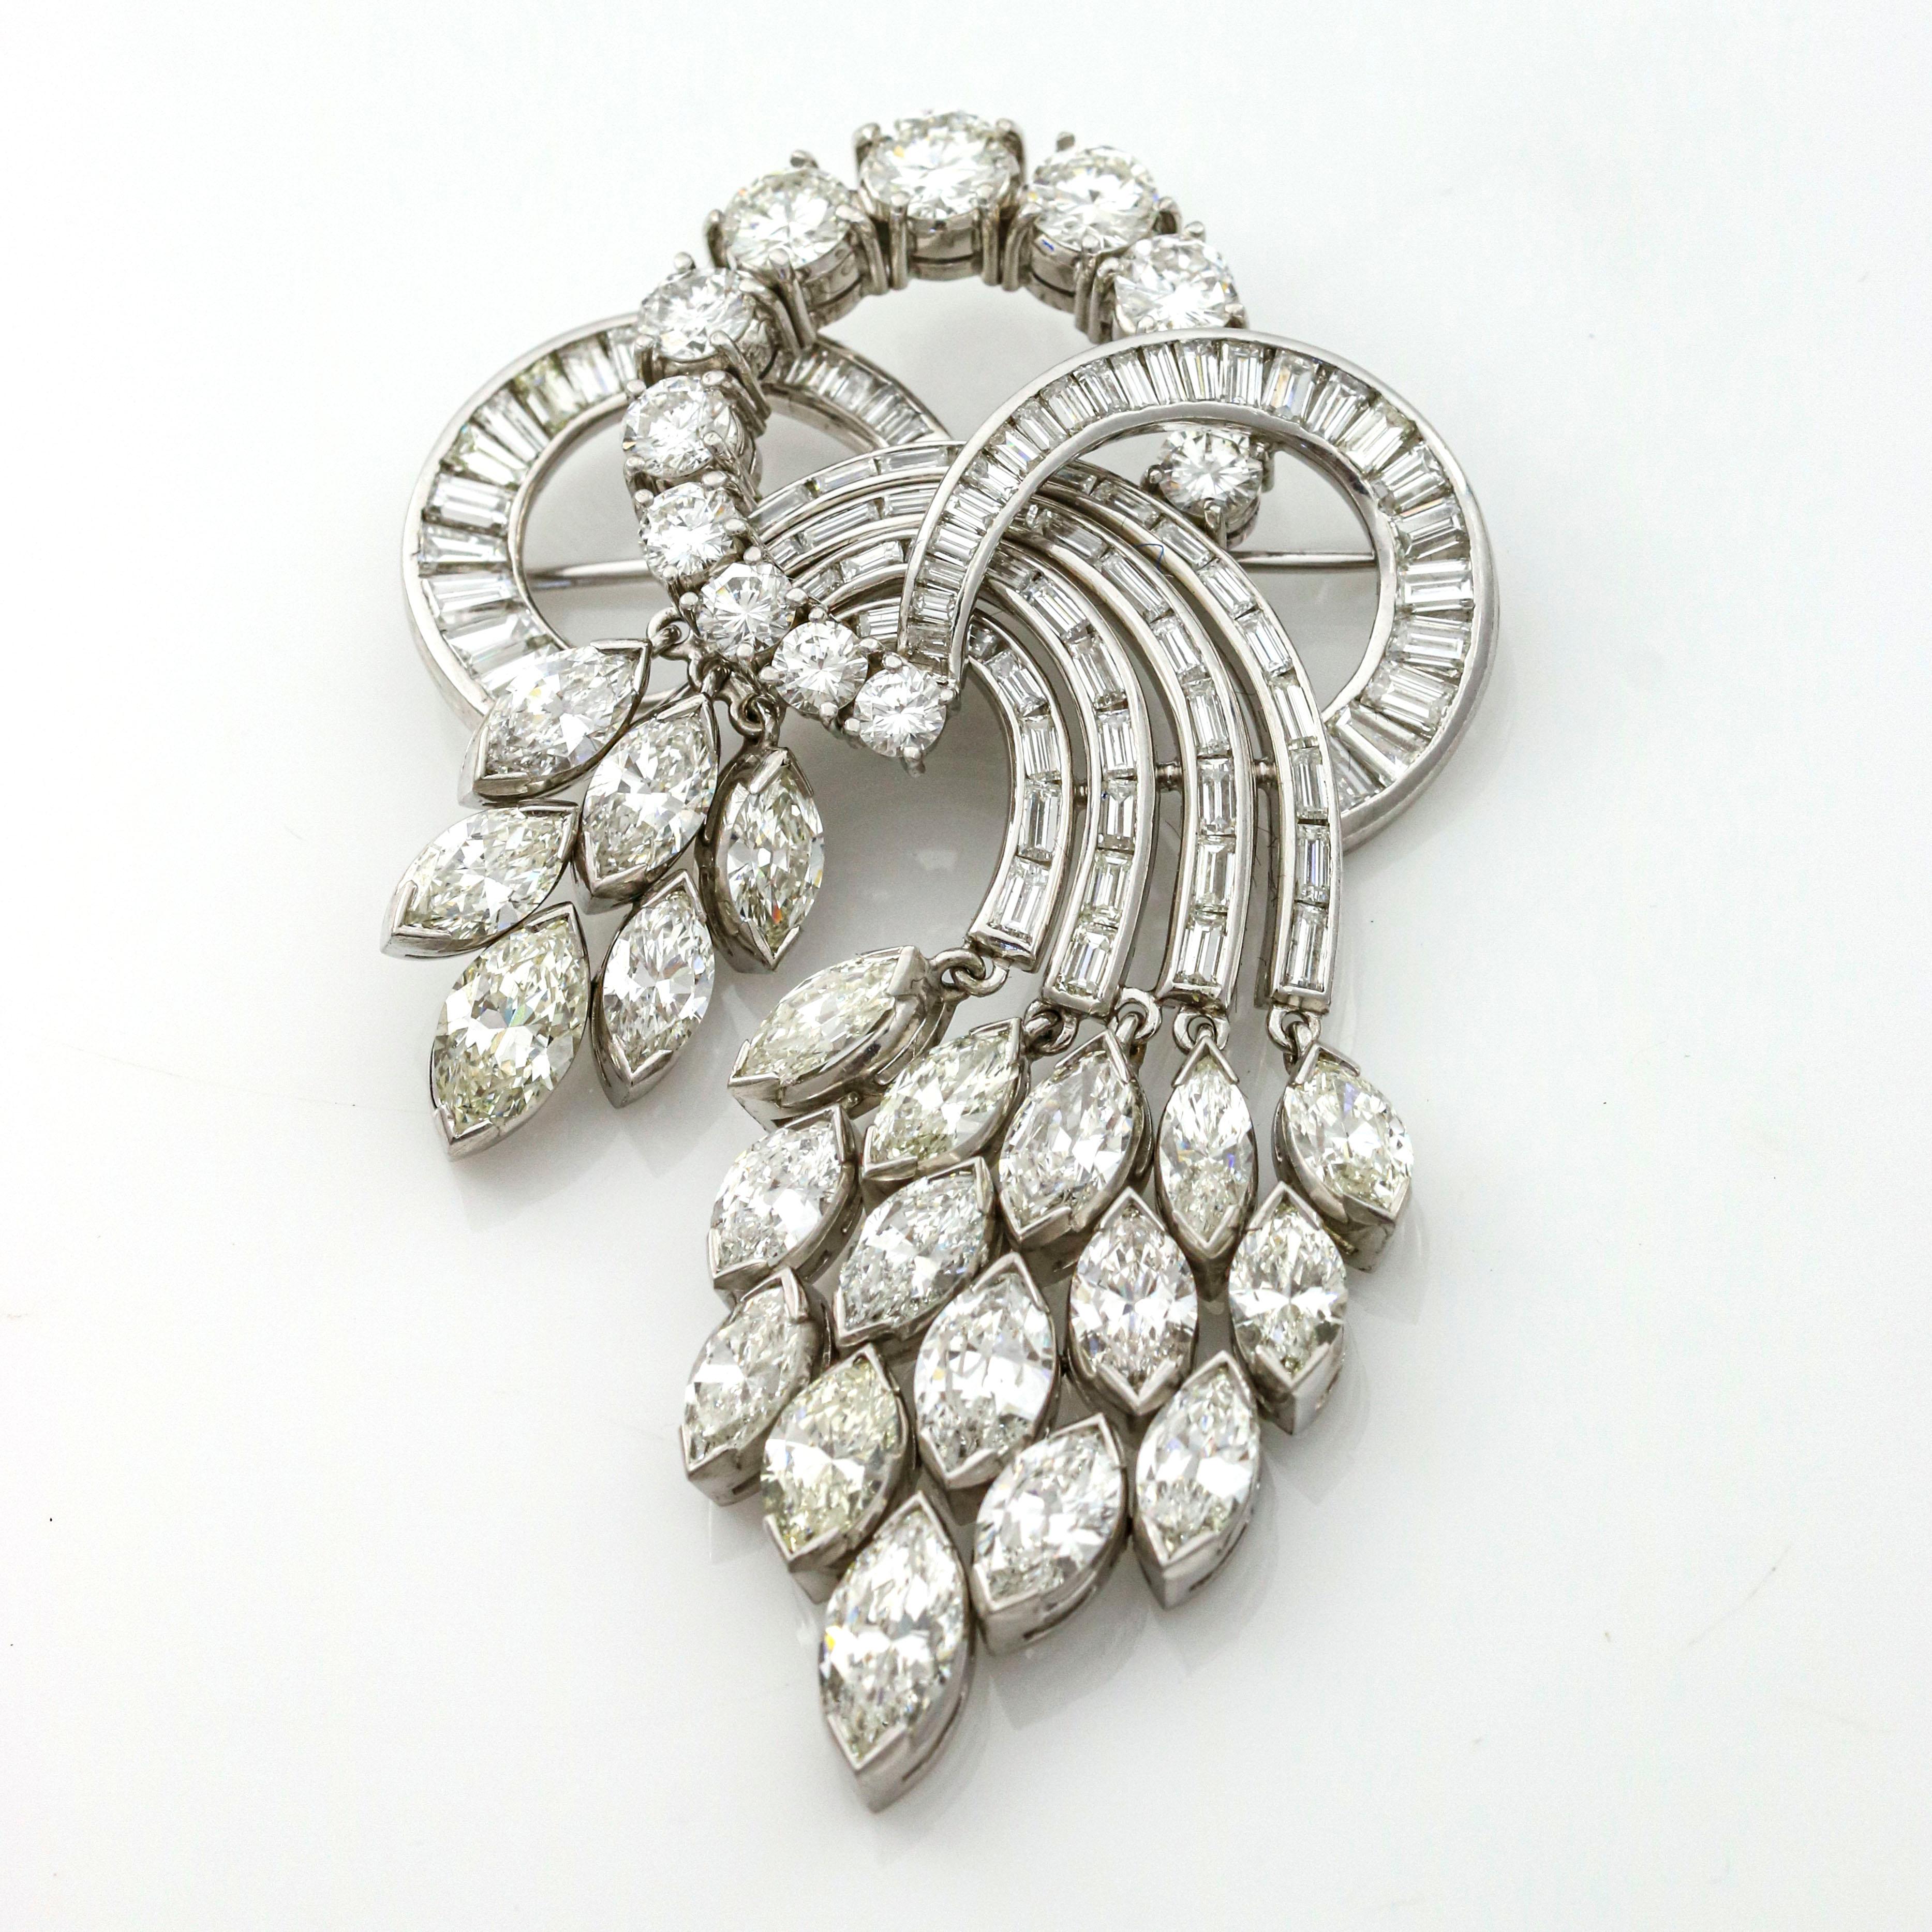 Aria diamond brooch in platinum. Circa 1950s. The brooch has 21 marquise cut diamonds, 11 round brilliant cut diamonds, and numerous baguette cut diamonds. Diamond color G-I, clarity VS-SI.

Diamond Total Carat Weight, 19.24 Carats